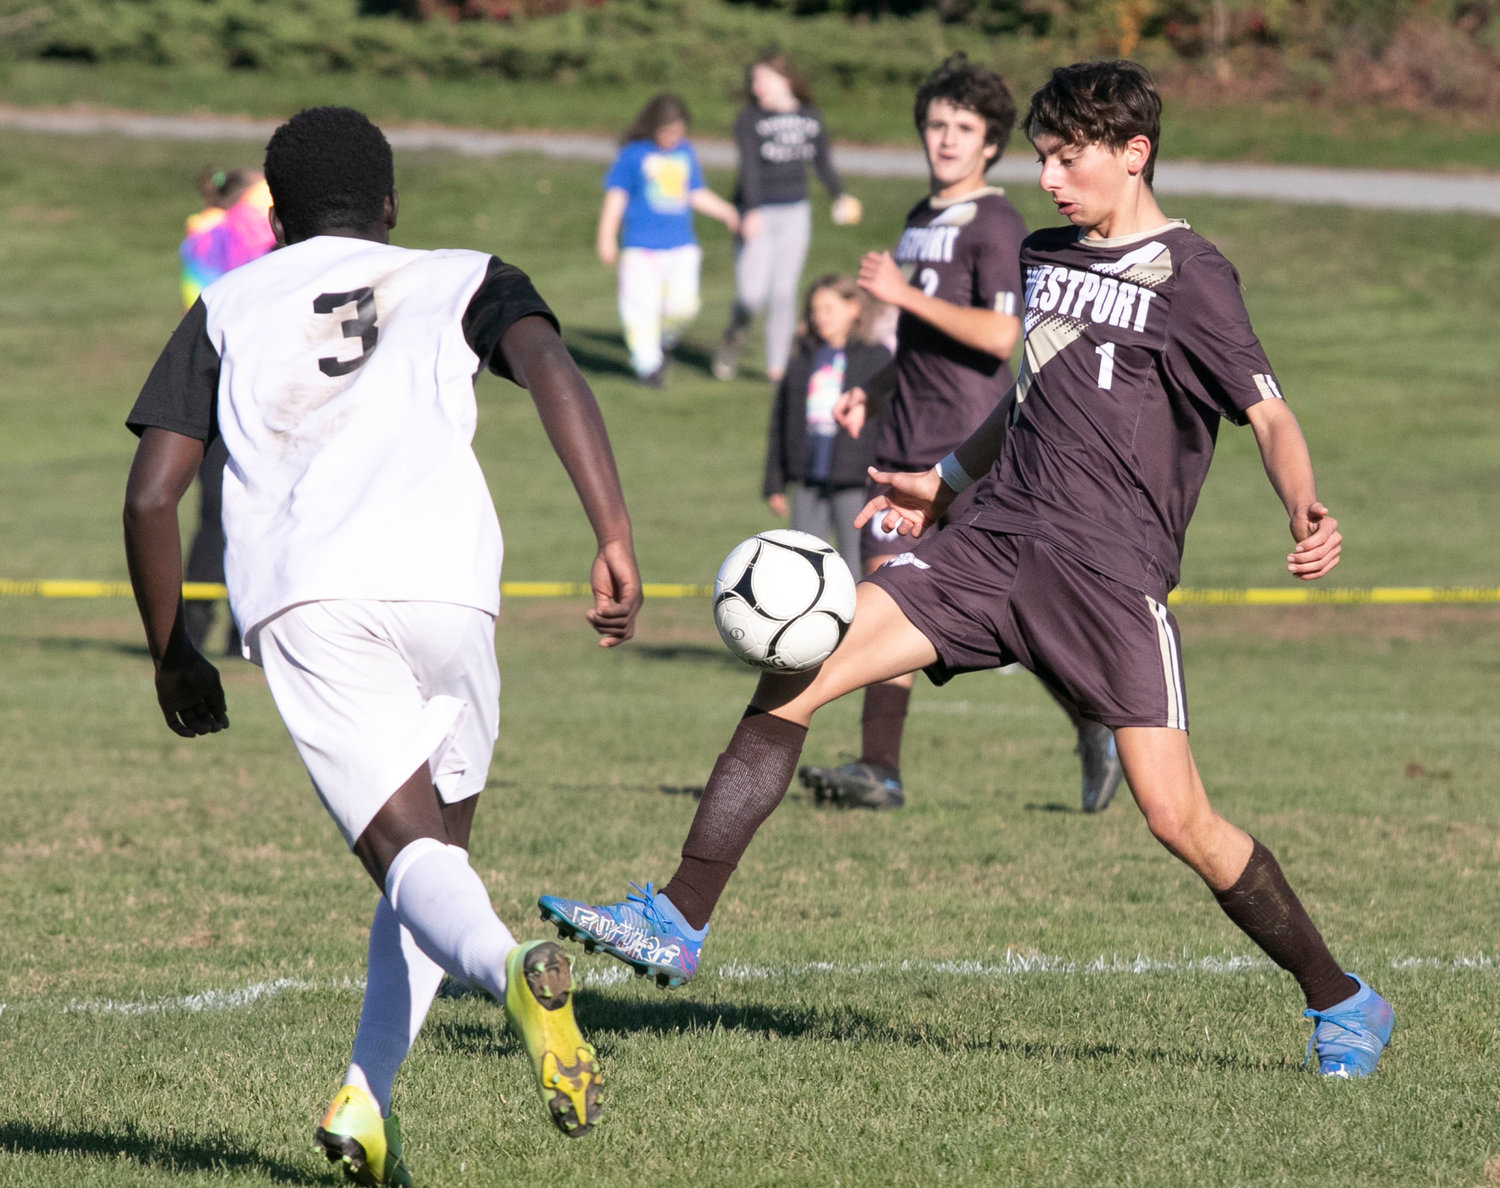 Midfielder Owen Couto collects a pass from a teammate at midfield.